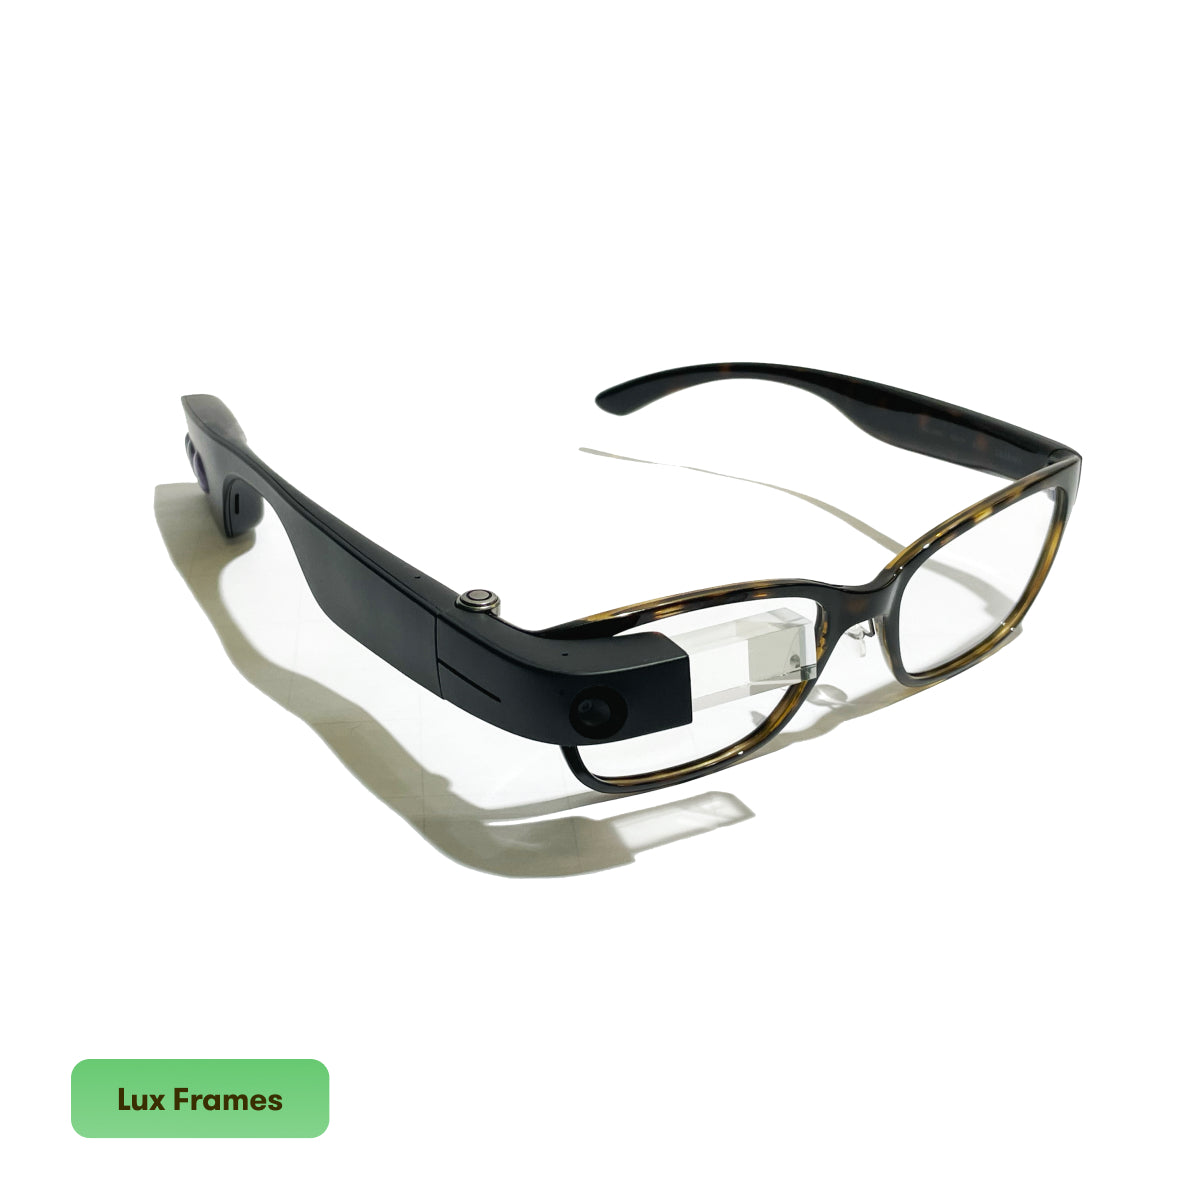 Photo of the Envision Glasses with the Lux Frames (3/4 Top View)